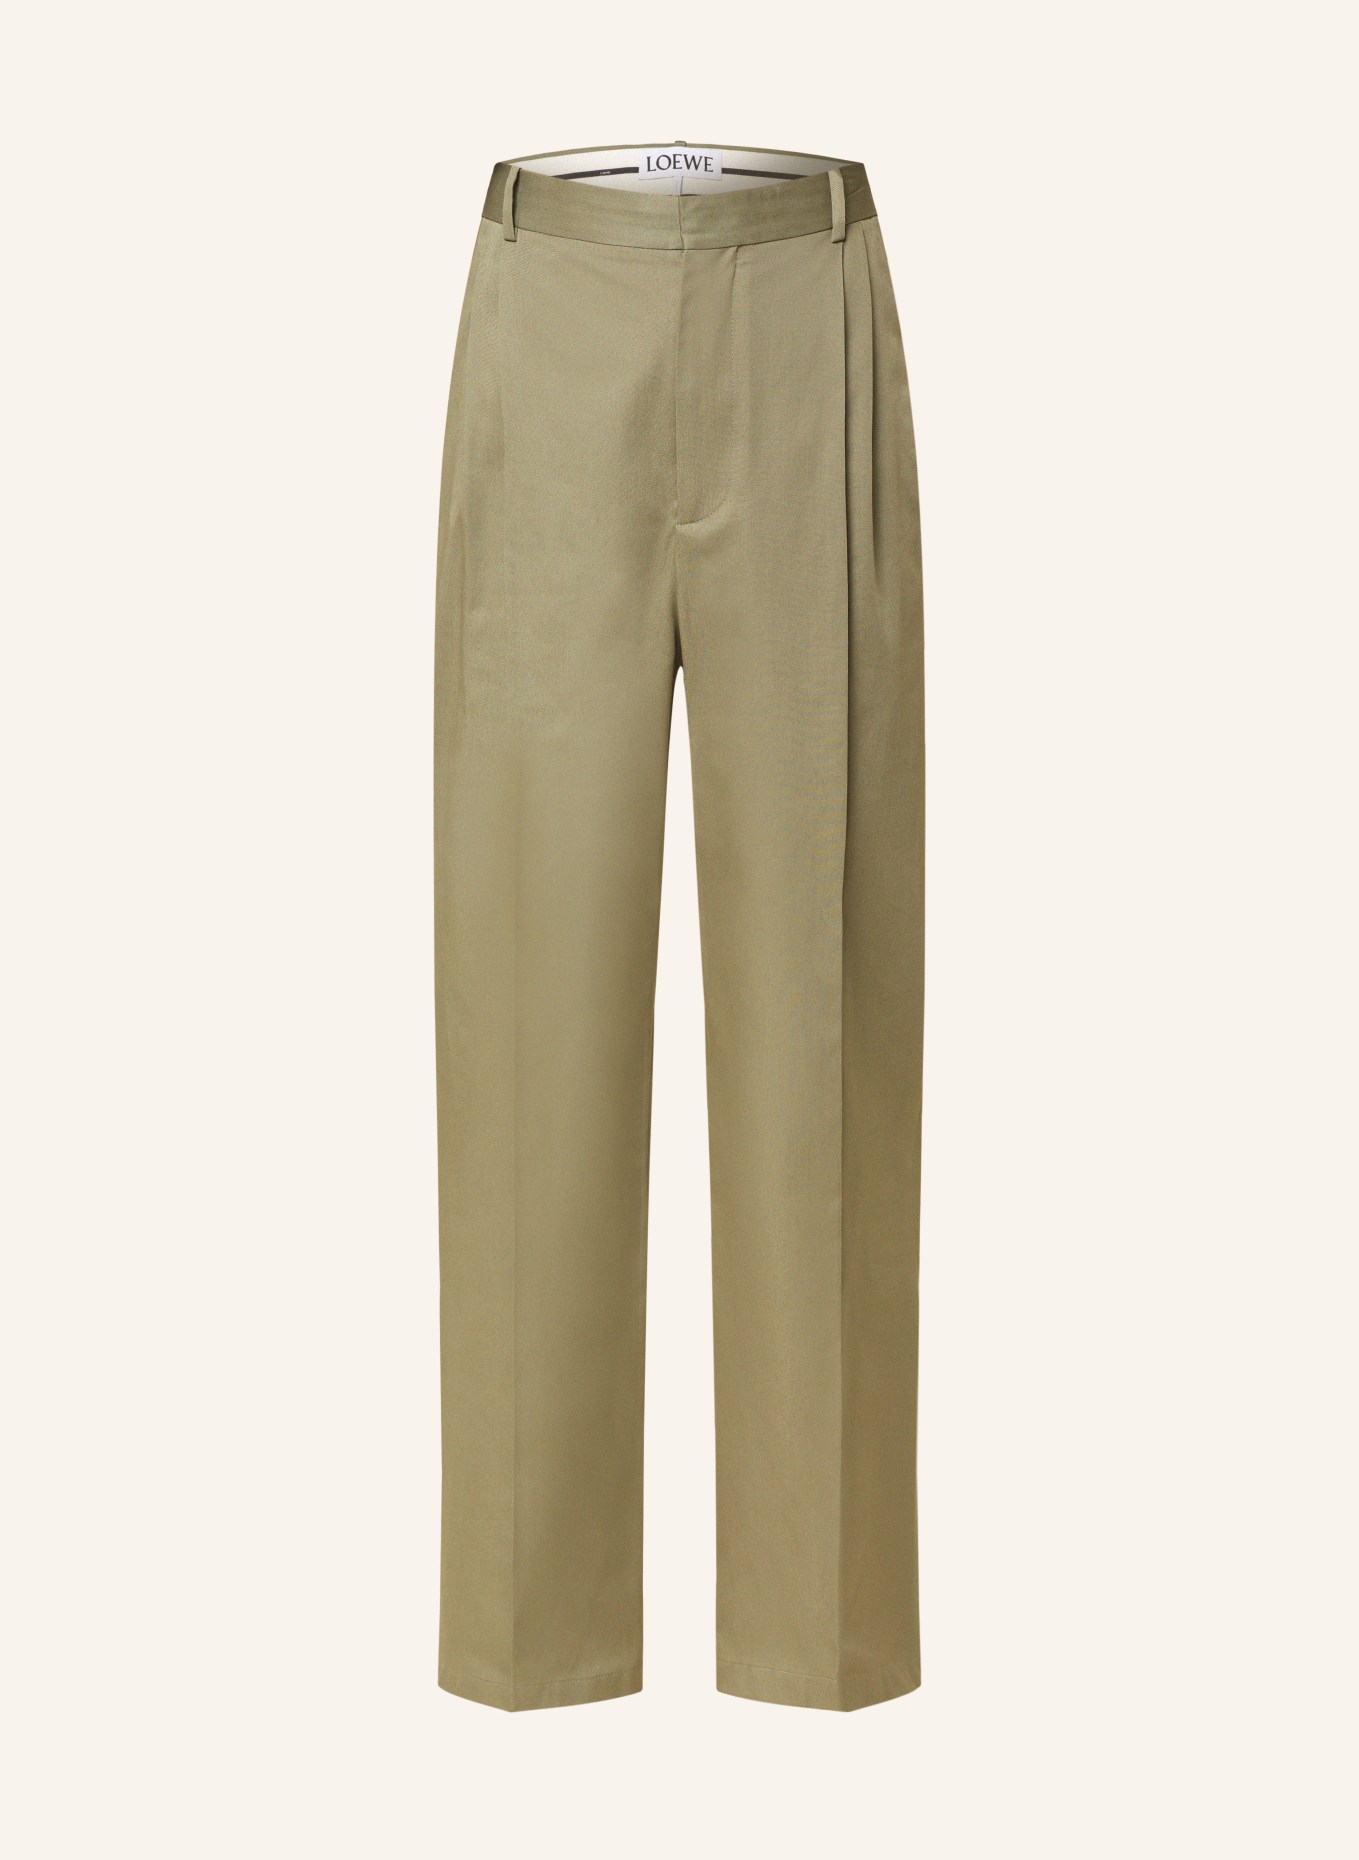 LOEWE Hose Relaxed Fit, Farbe: OLIV (Bild 1)